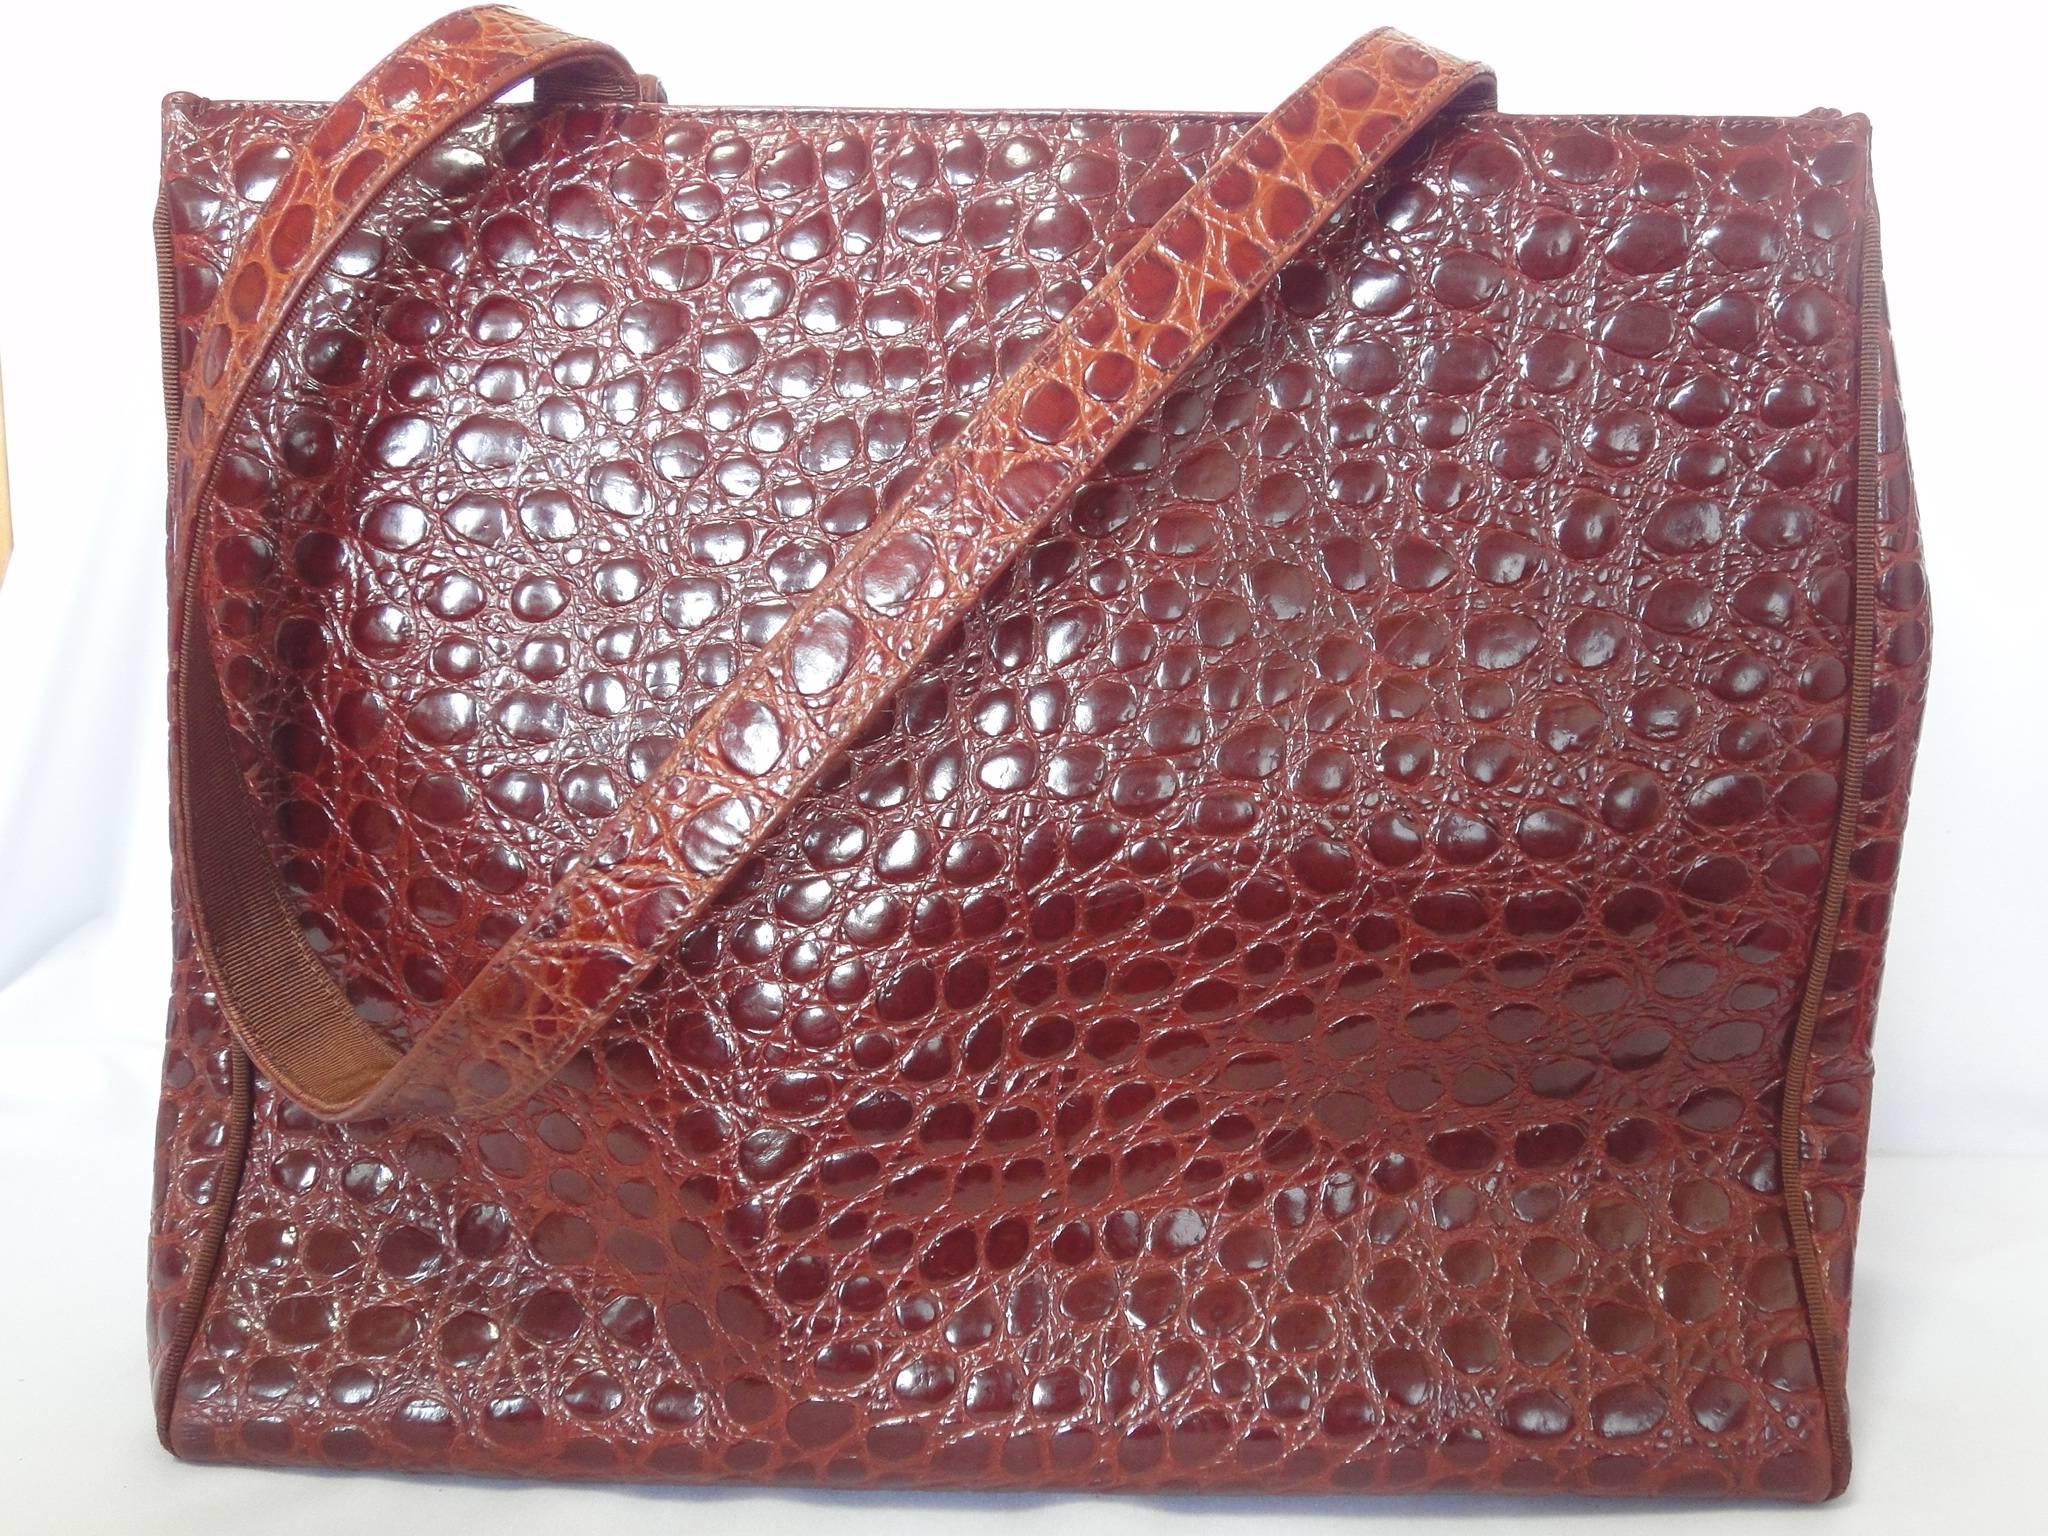 Vintage Salvatore Ferragamo brown croc embossed genuine leather tote from vara collection.

Vintage Salvatore Ferragamo brown croc embossed leather tote in genuine leather from Vara collection.
The logo is embossed on the golden hardware at